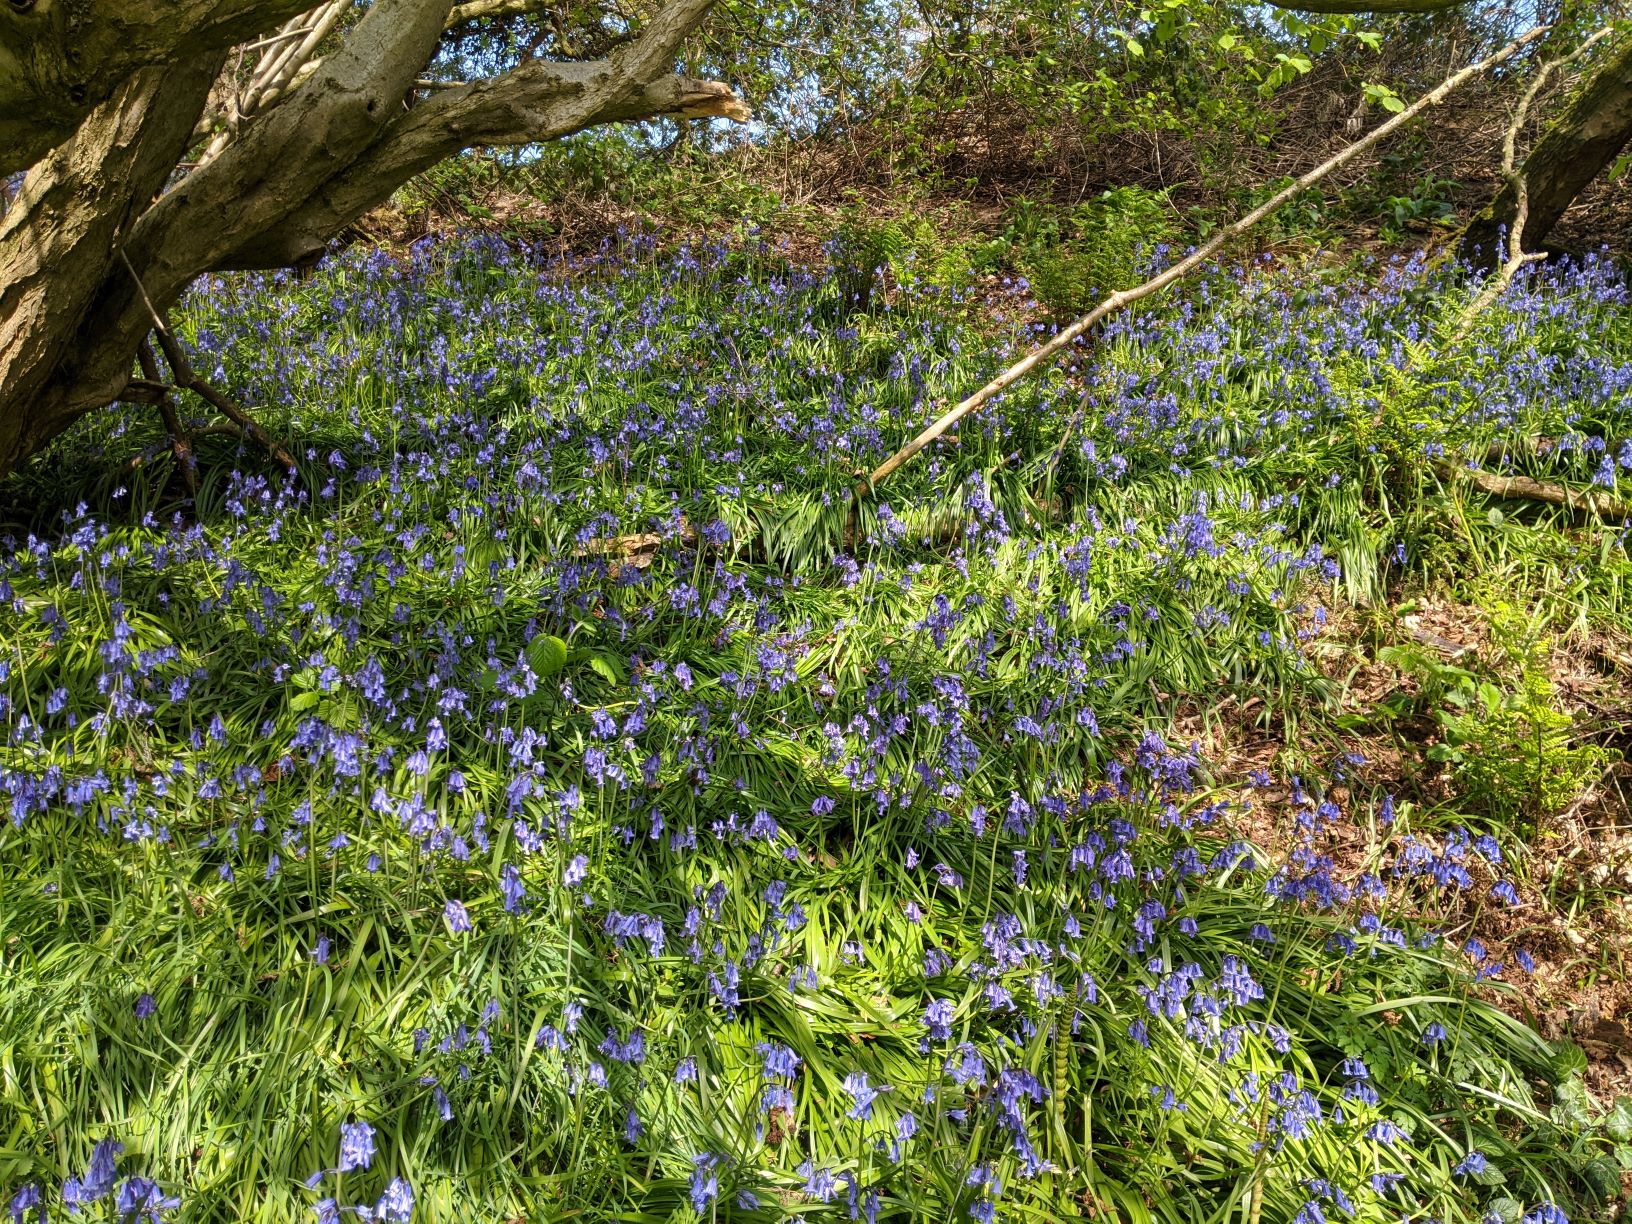 Bluebells in Mill Lane, April 16th 2020